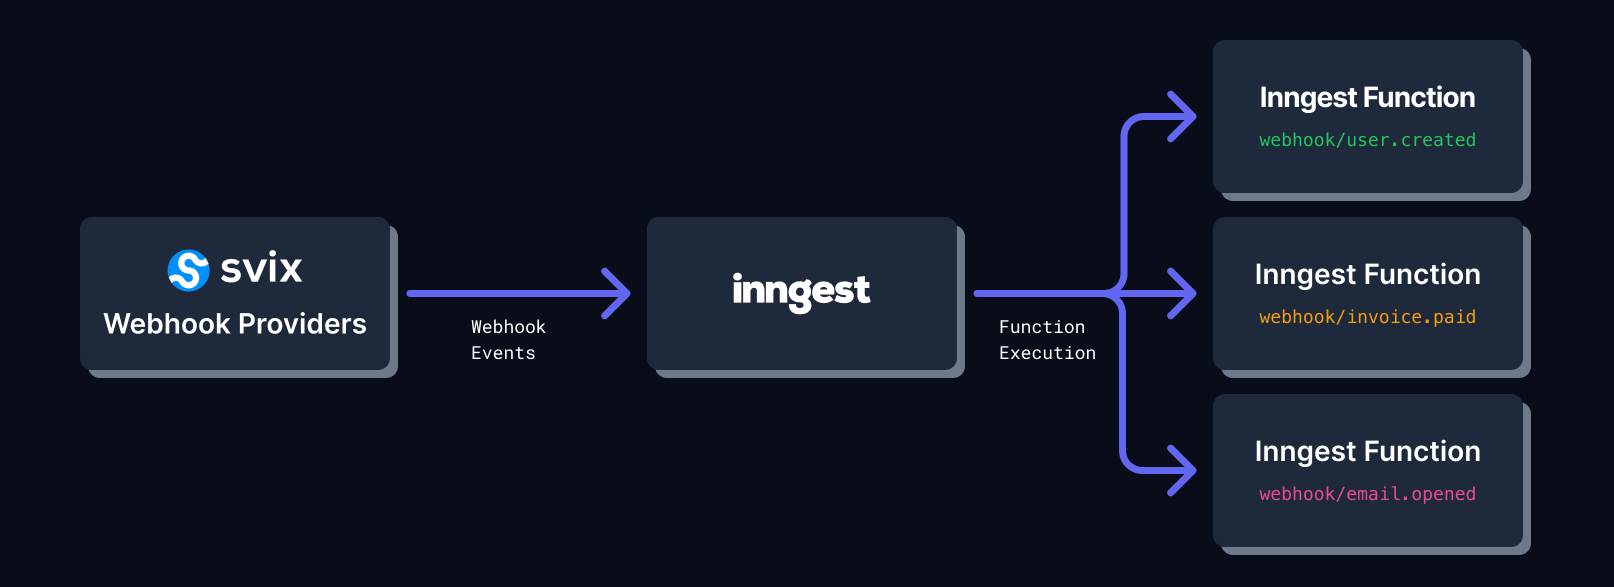 A diagram showing how Svix sends webhook events to Inngest which invokes functions with these events